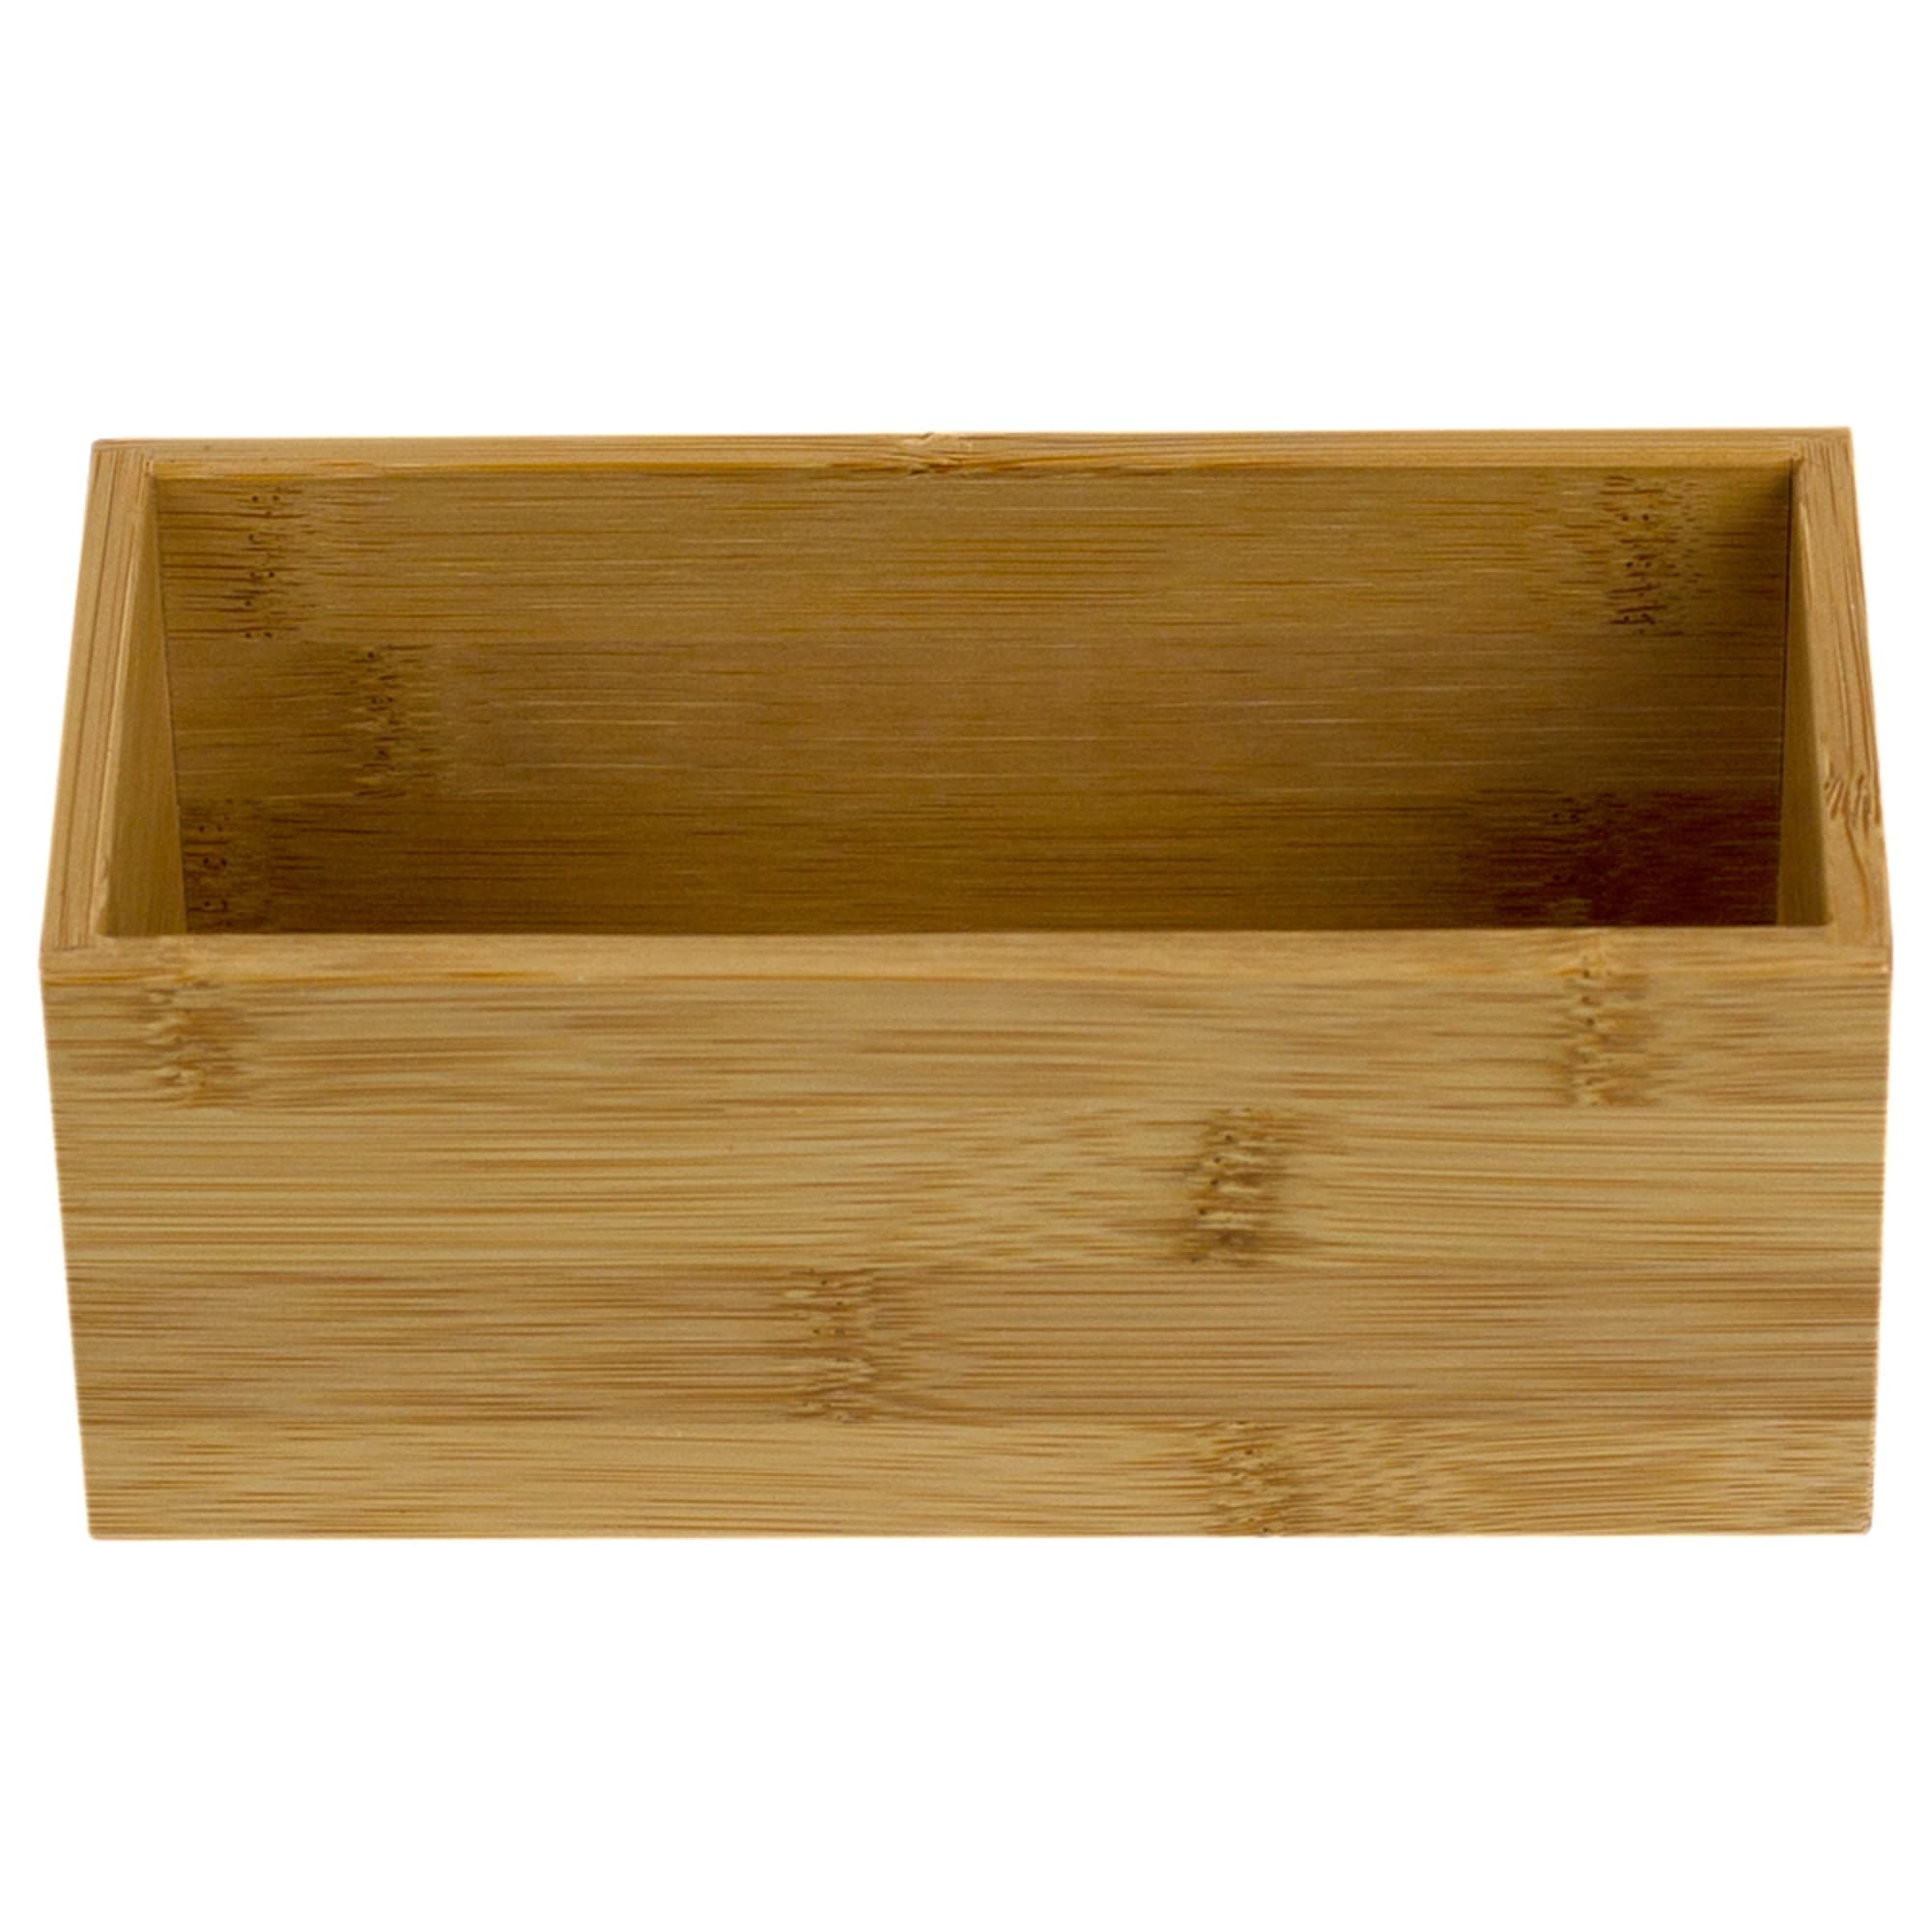 Home Basics 3" x 6" Bamboo Organizer, Natural $3 EACH, CASE PACK OF 12